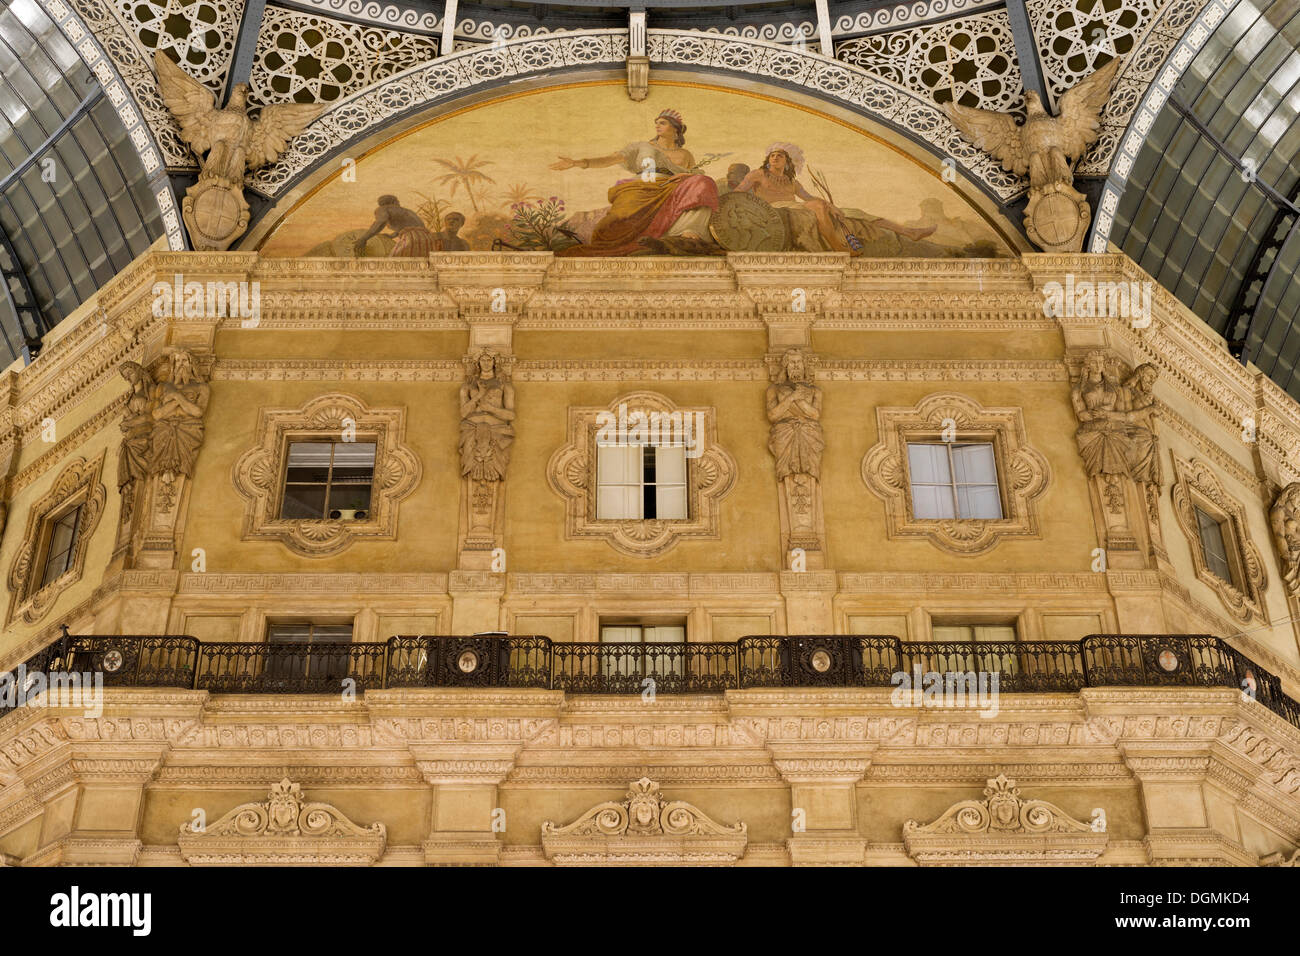 Fresco representing America in a lunette of the dome of Galleria Vittorio Emanuele II, opened on 15 September 1867 Stock Photo